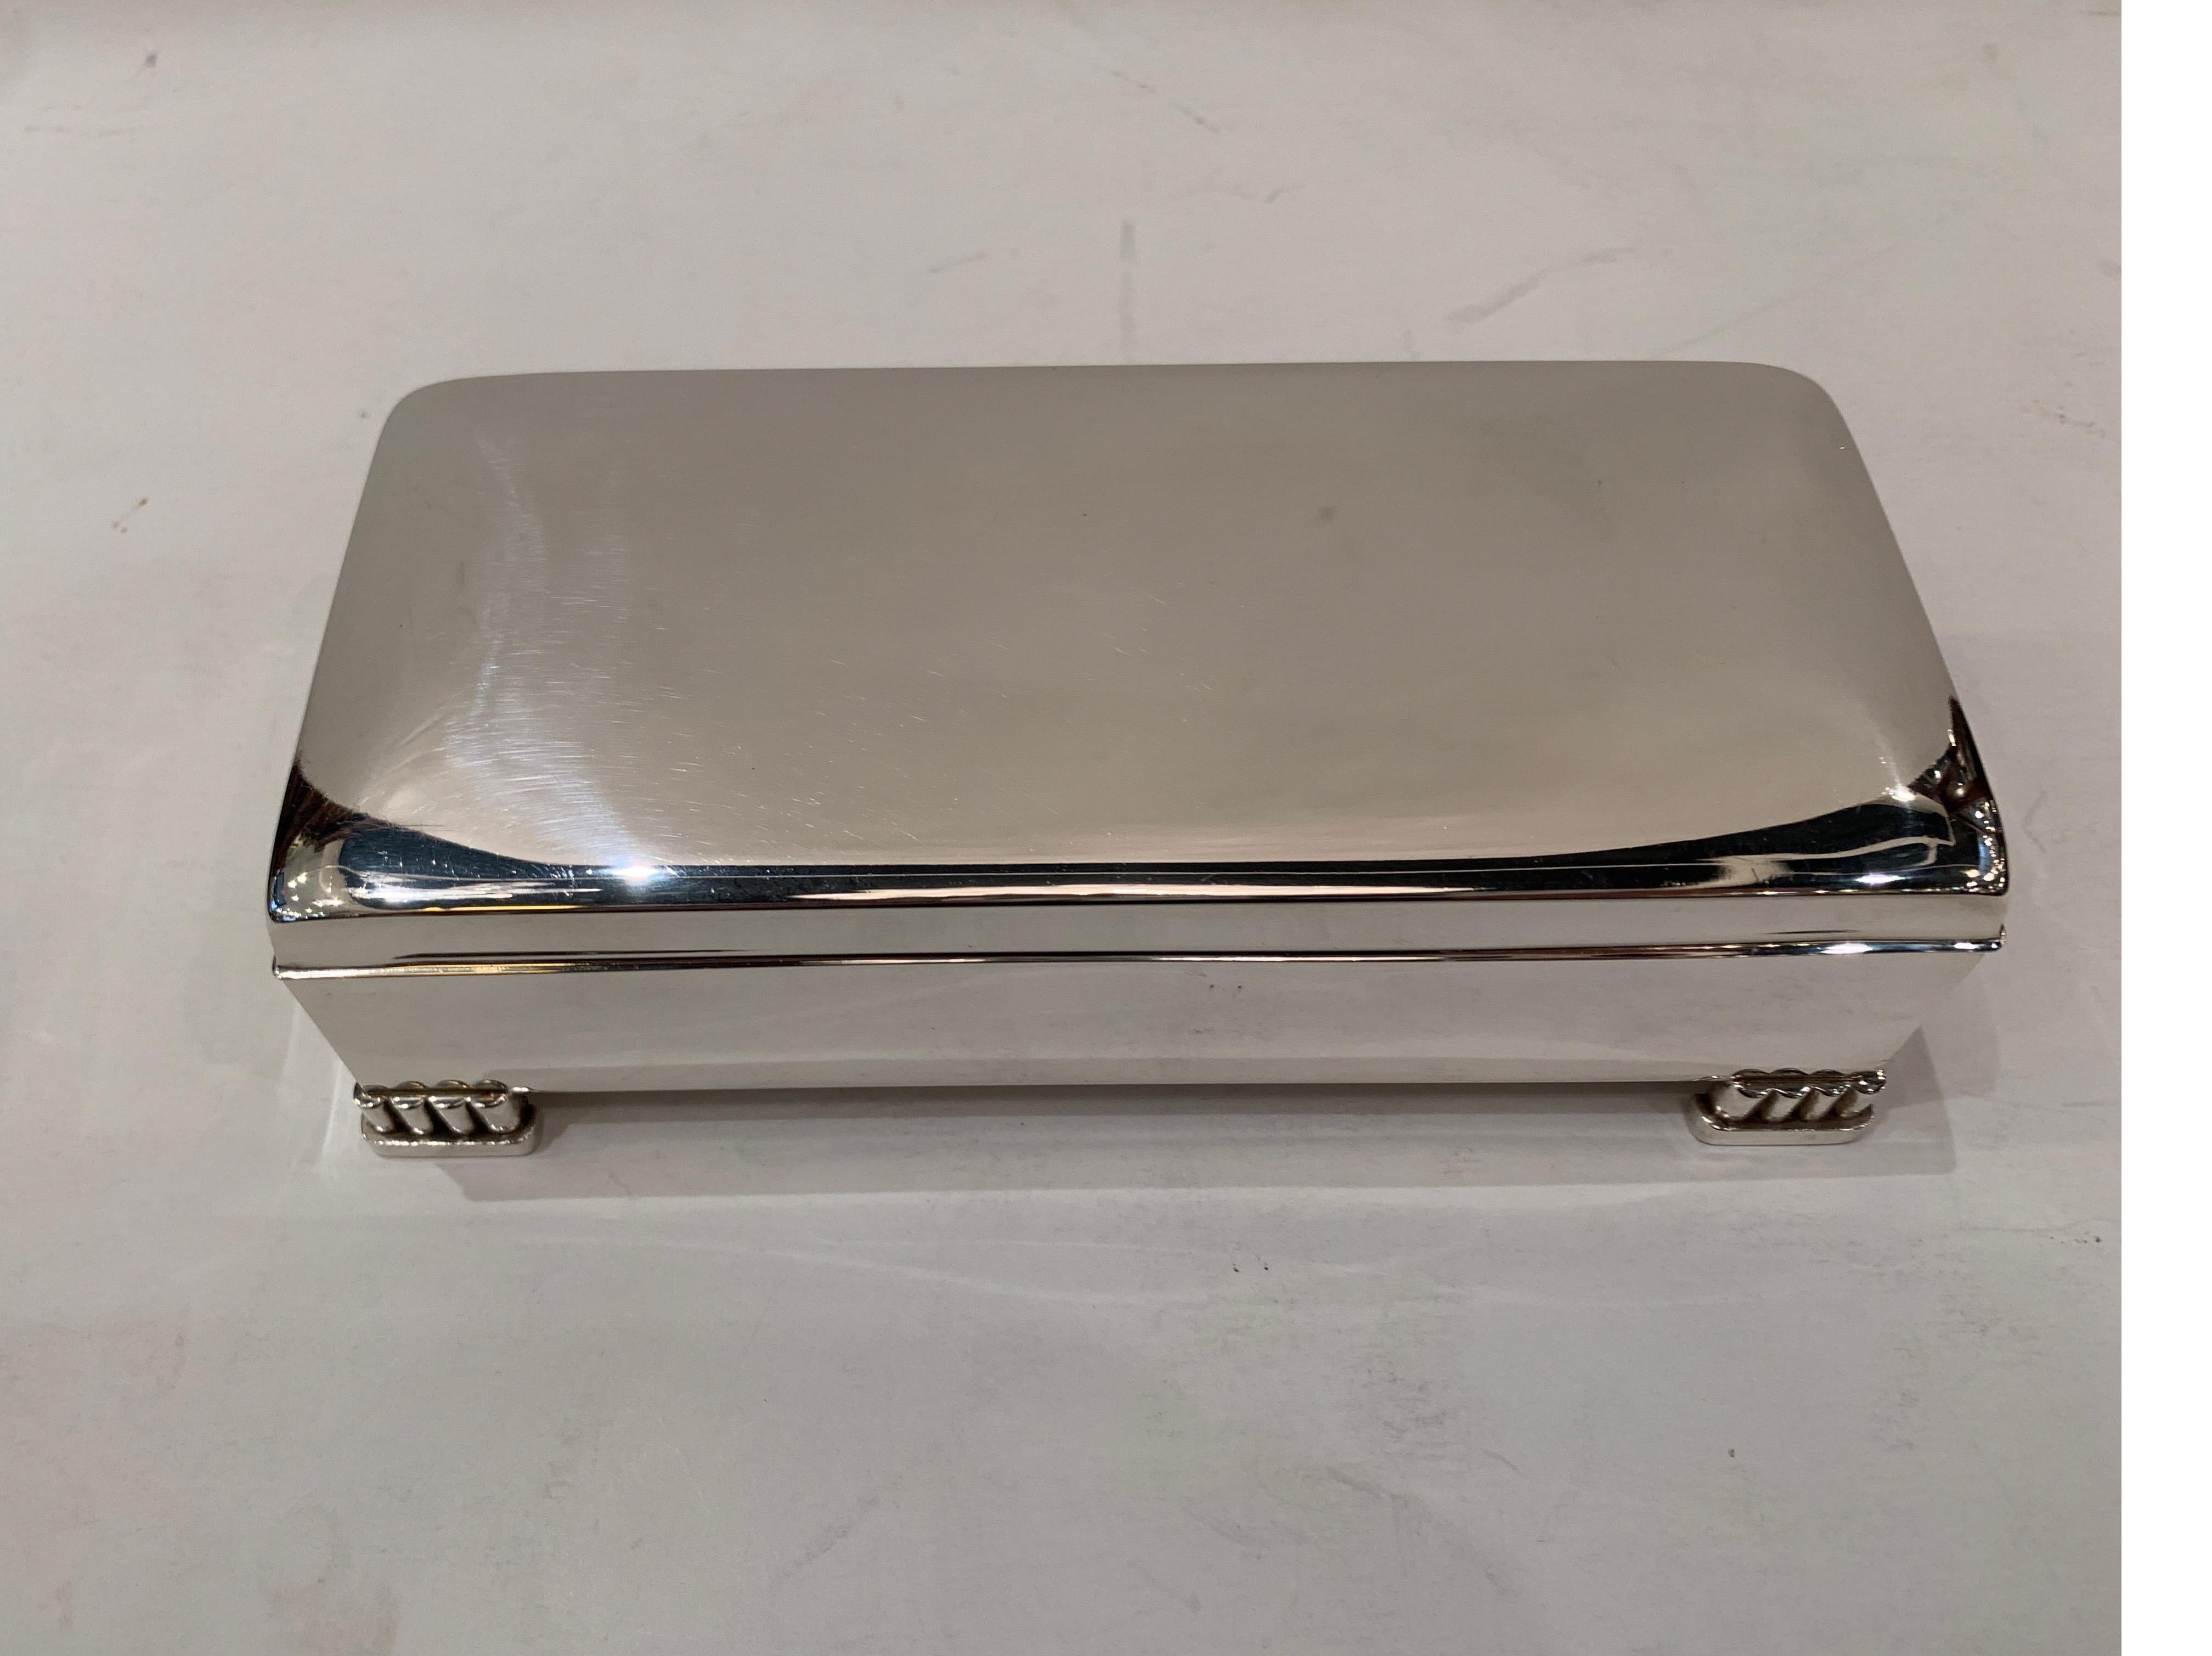 Early 20th century sterling silver dresser-desk box by Poole Silver Co.
Great accent piece with many uses
Dimensions: W 7.5